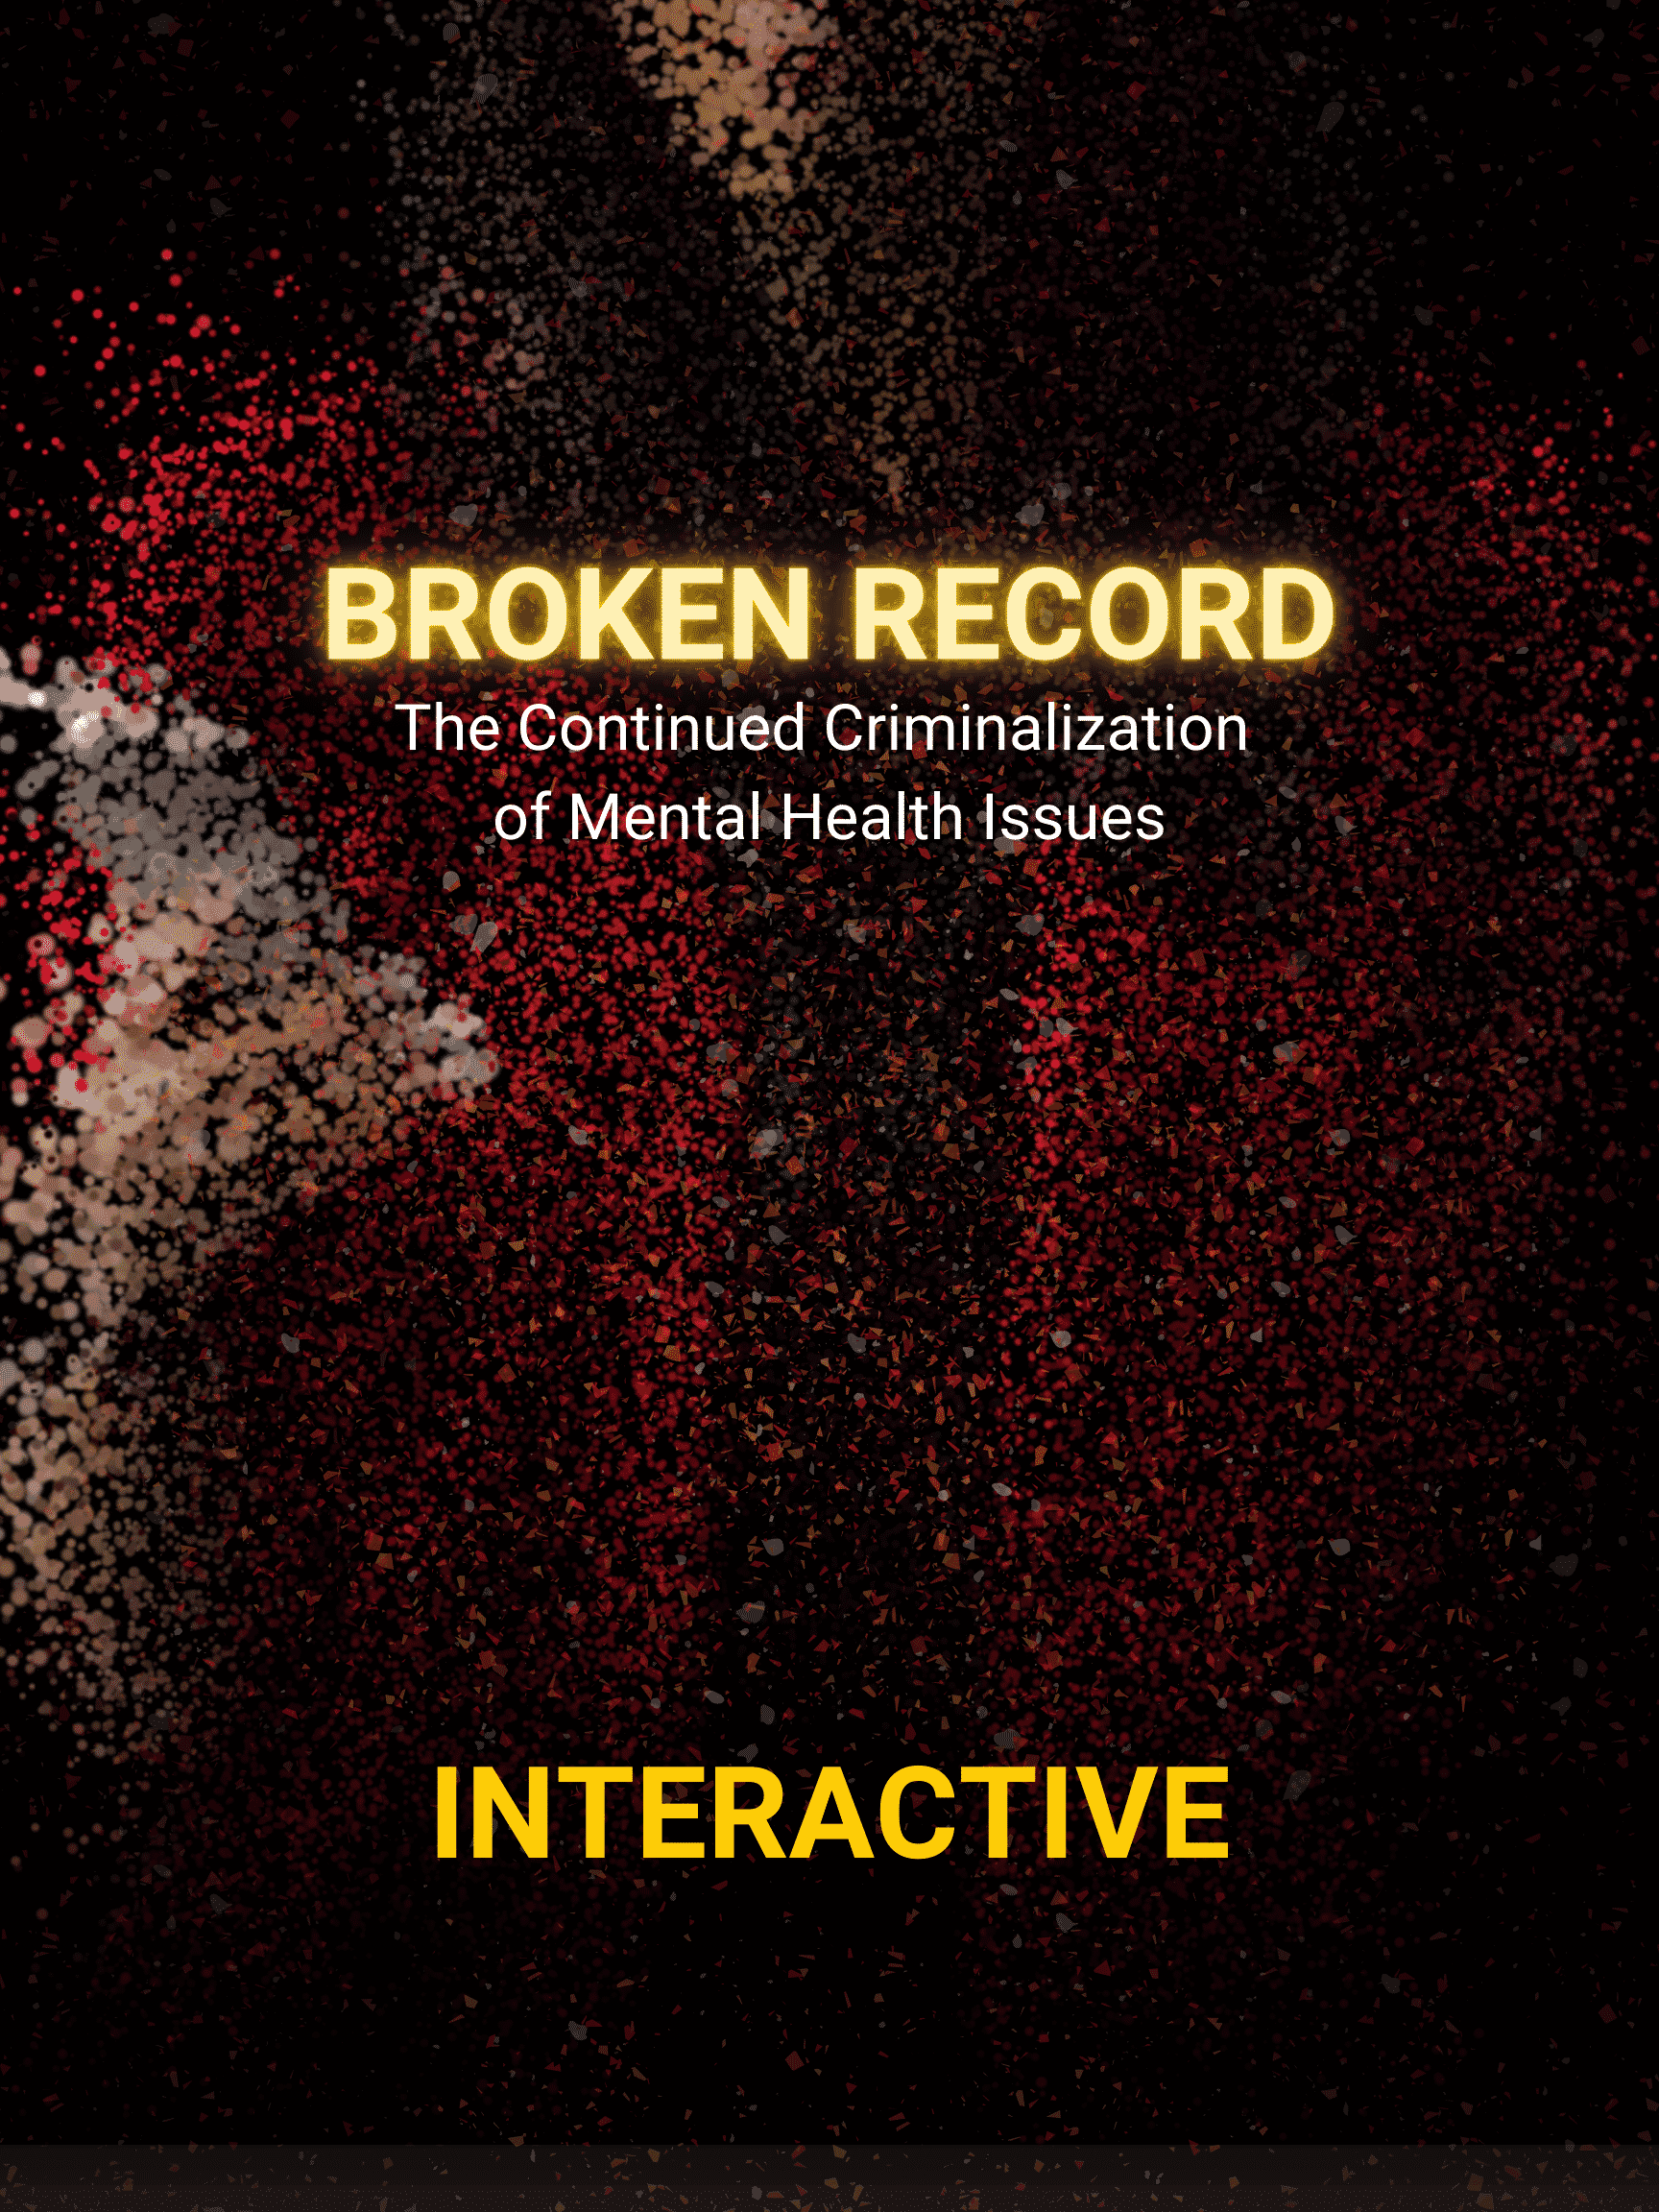 Cover of Broken Record report with abstract red and gold dots